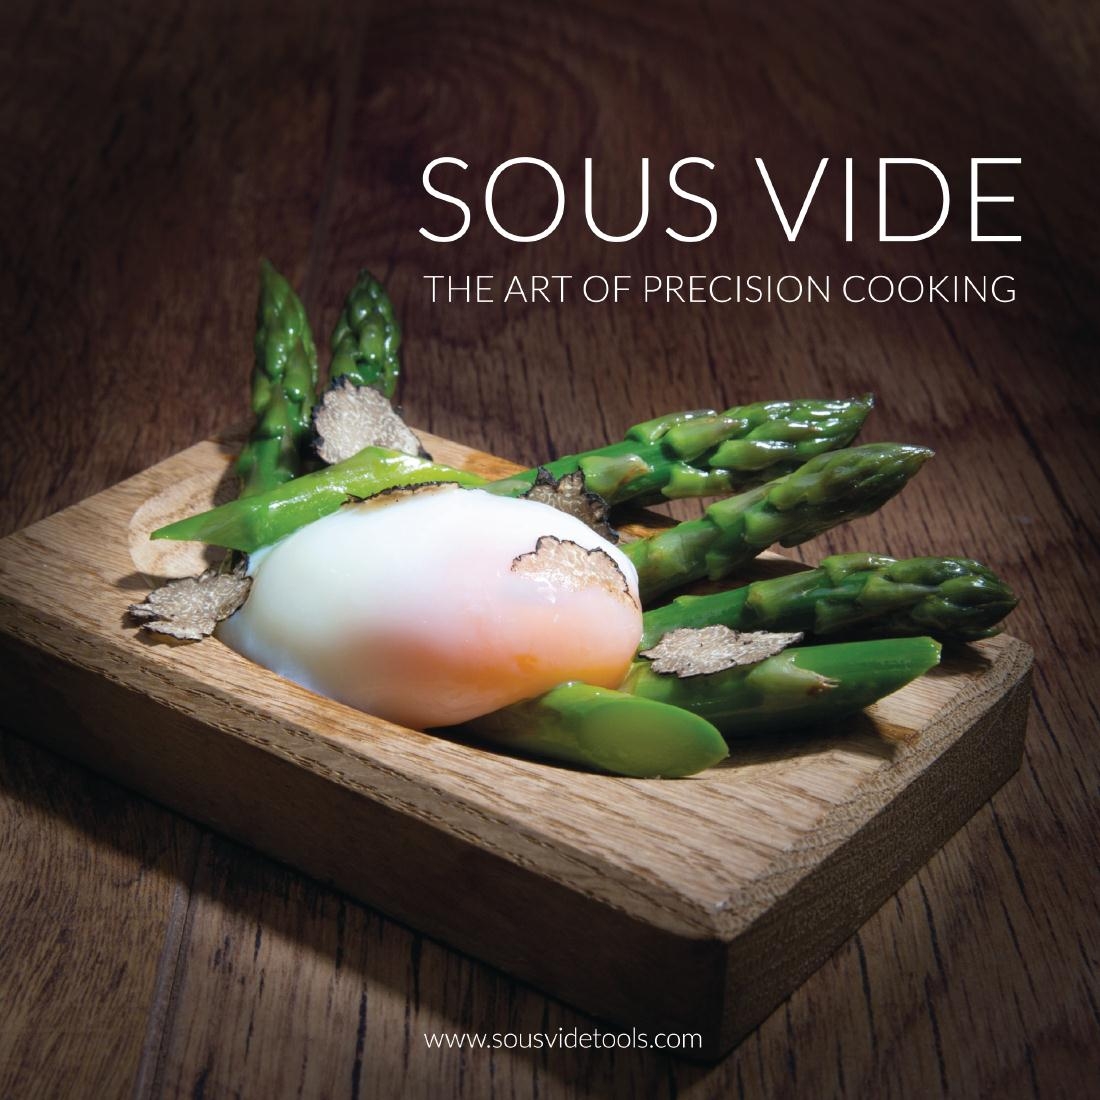 Sous Vide - The Art of Precision Cooking